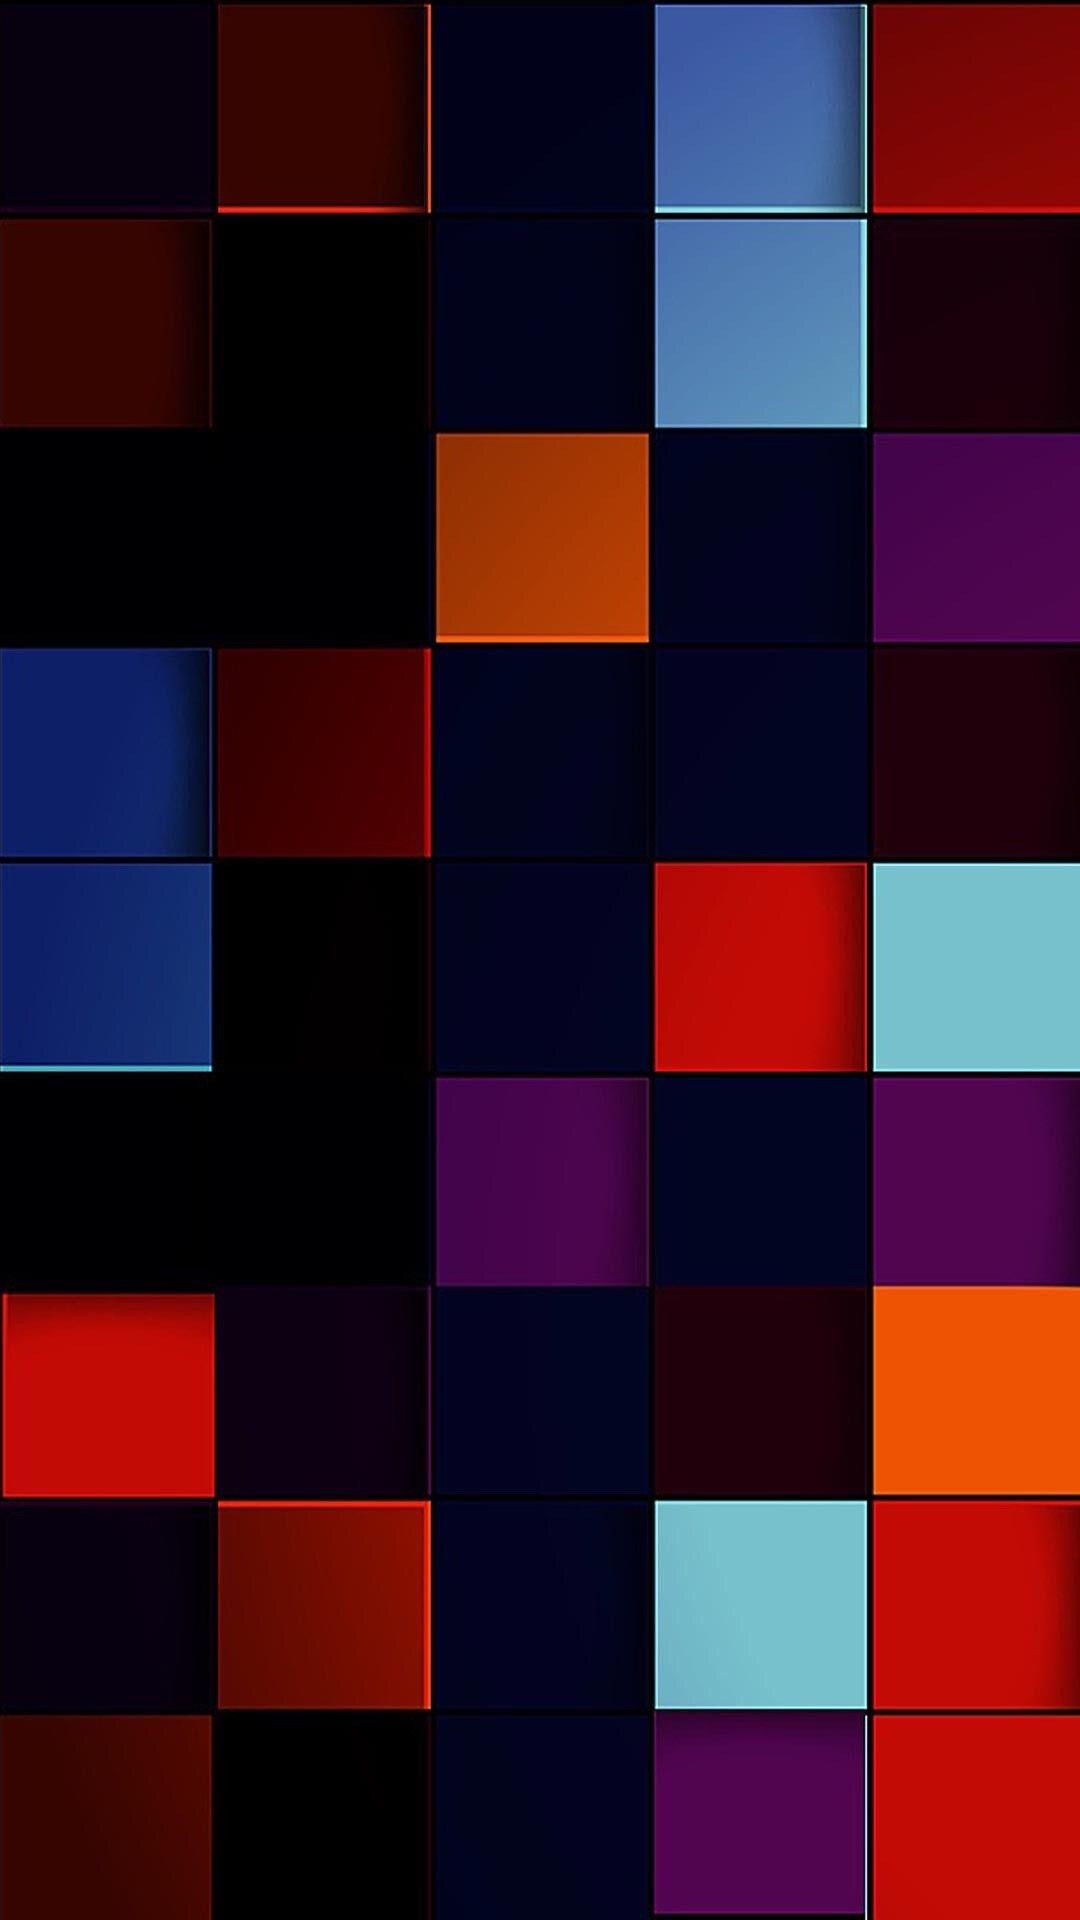 Colorful Geometric Shapes Wallpaper. Abstract iphone